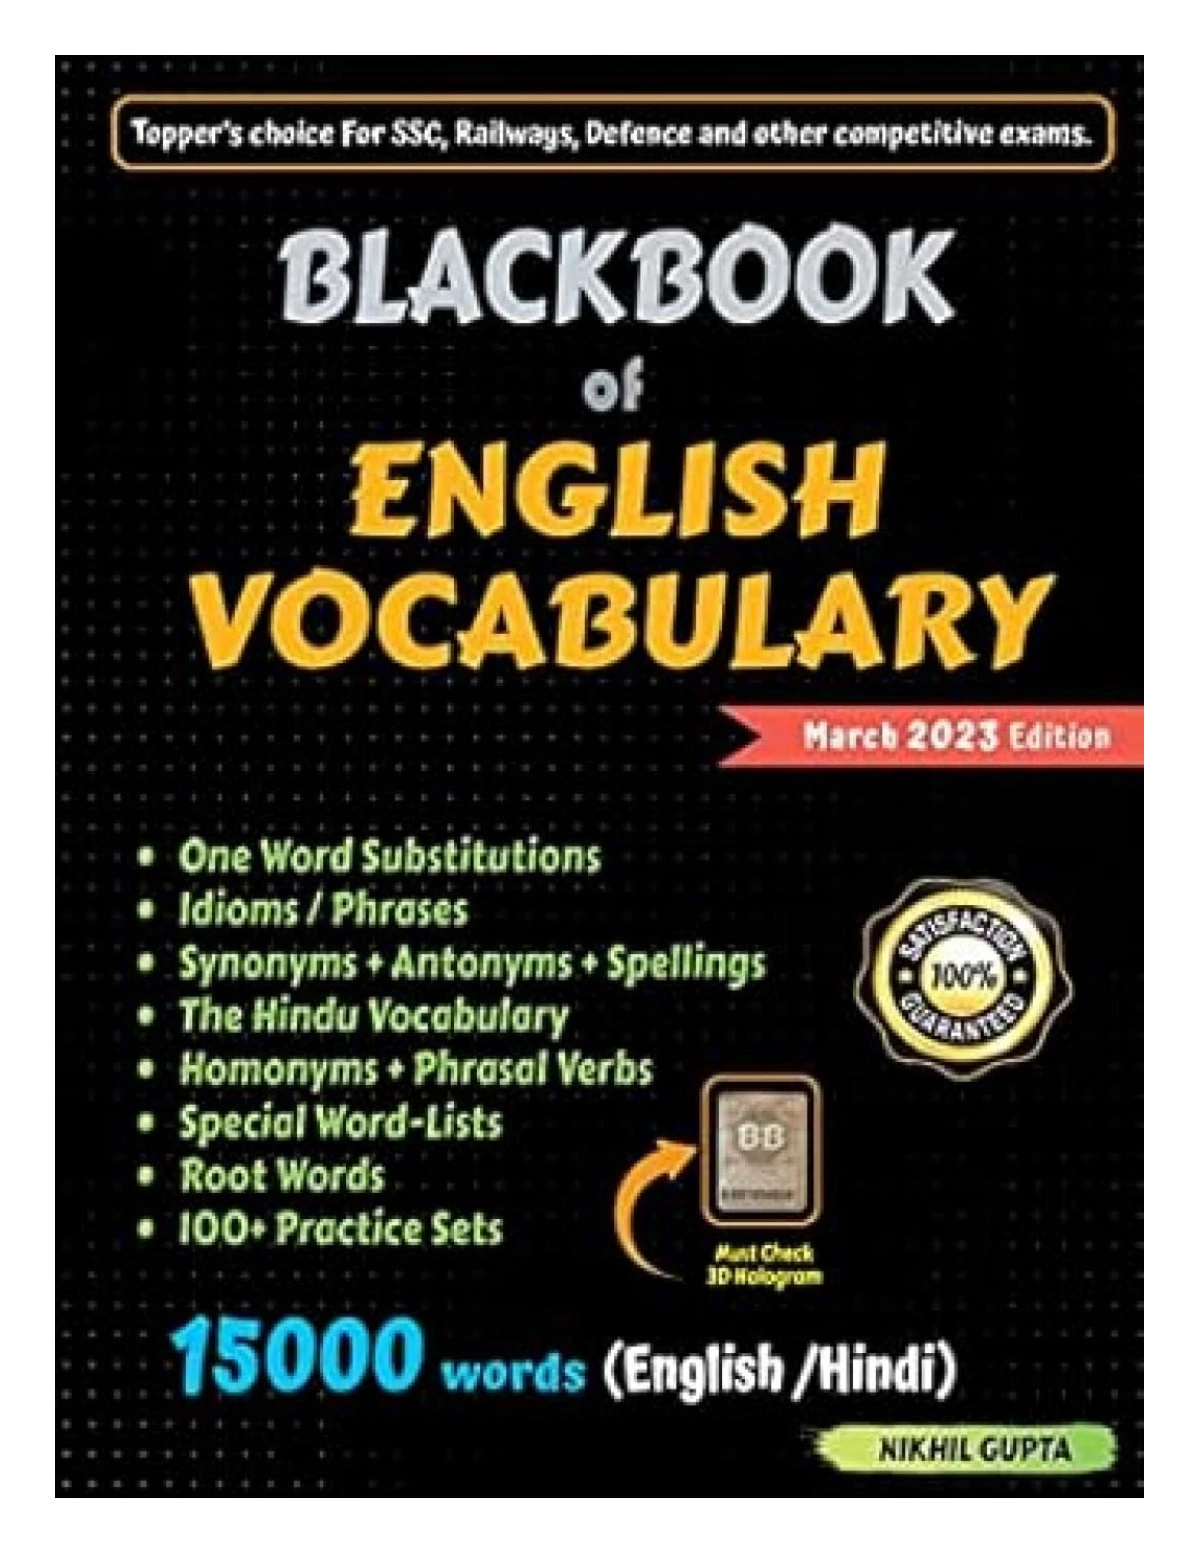 Black Book of English Vocabulary for SSC, Banking & Competitive Exam